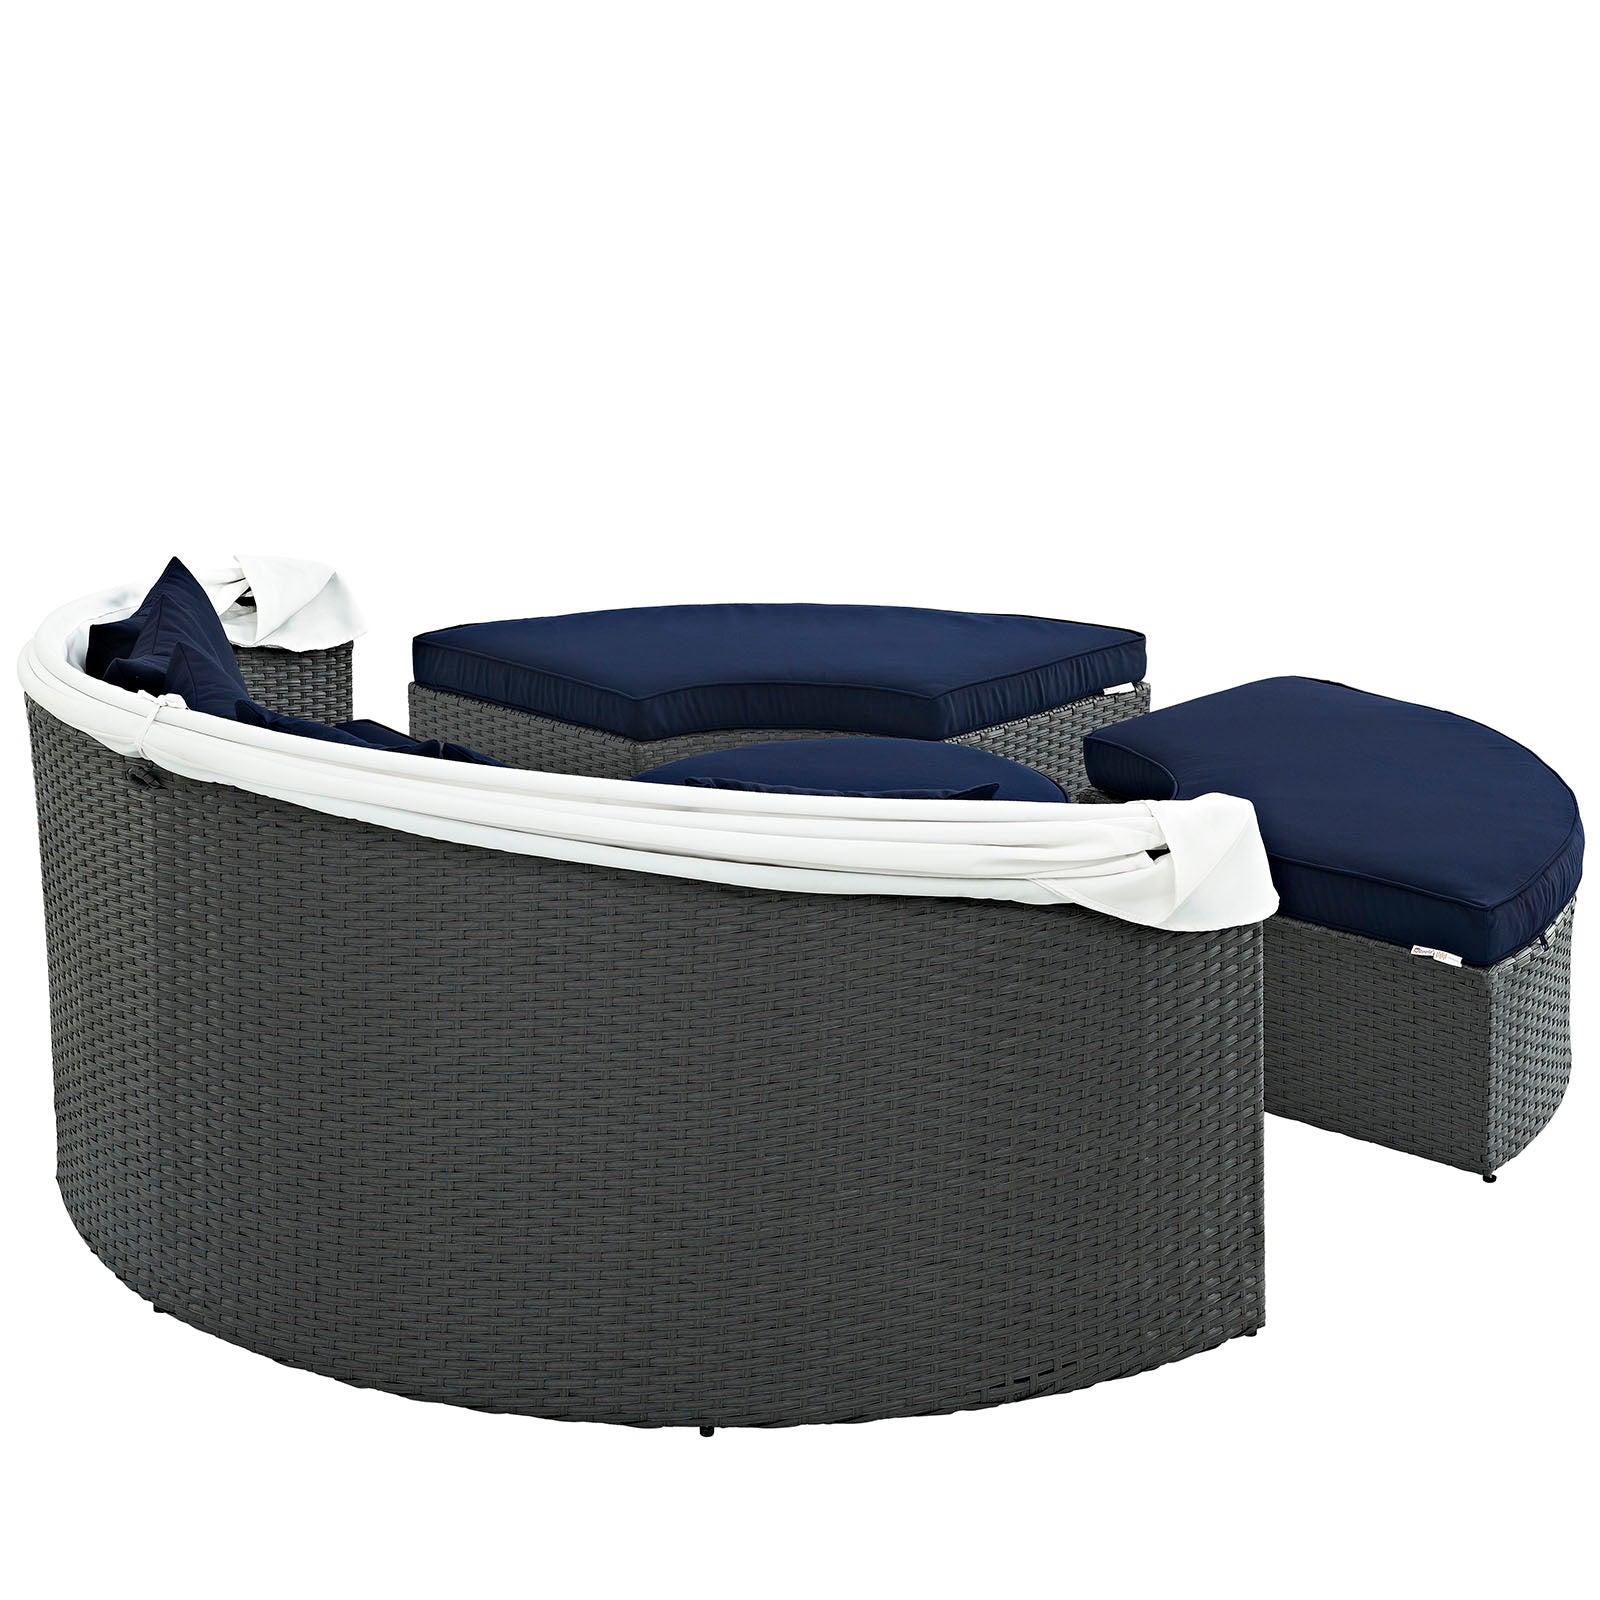 Modway Patio Daybeds - Sojourn Outdoor Patio Sunbrella Daybed Canvas Navy